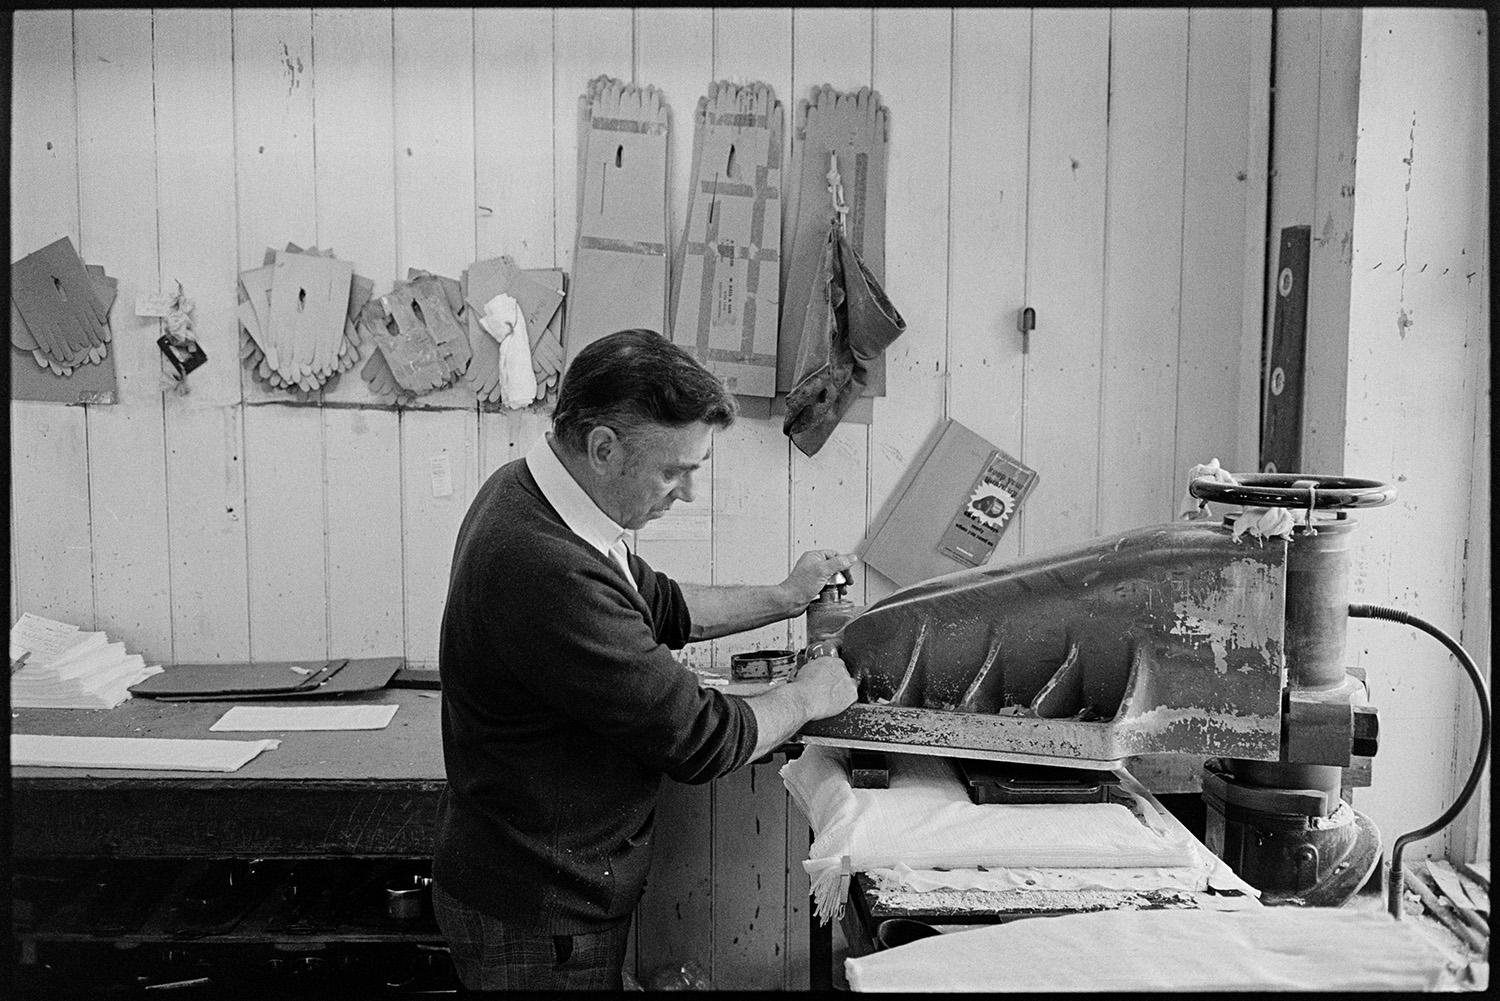 Workers in glove factory. Machinery. Pin-ups!
[A man working with machinery at Vaughans Glove Factory, Halsdon Terrace, Torrington. Glove templates are hung on the wall behind him.]